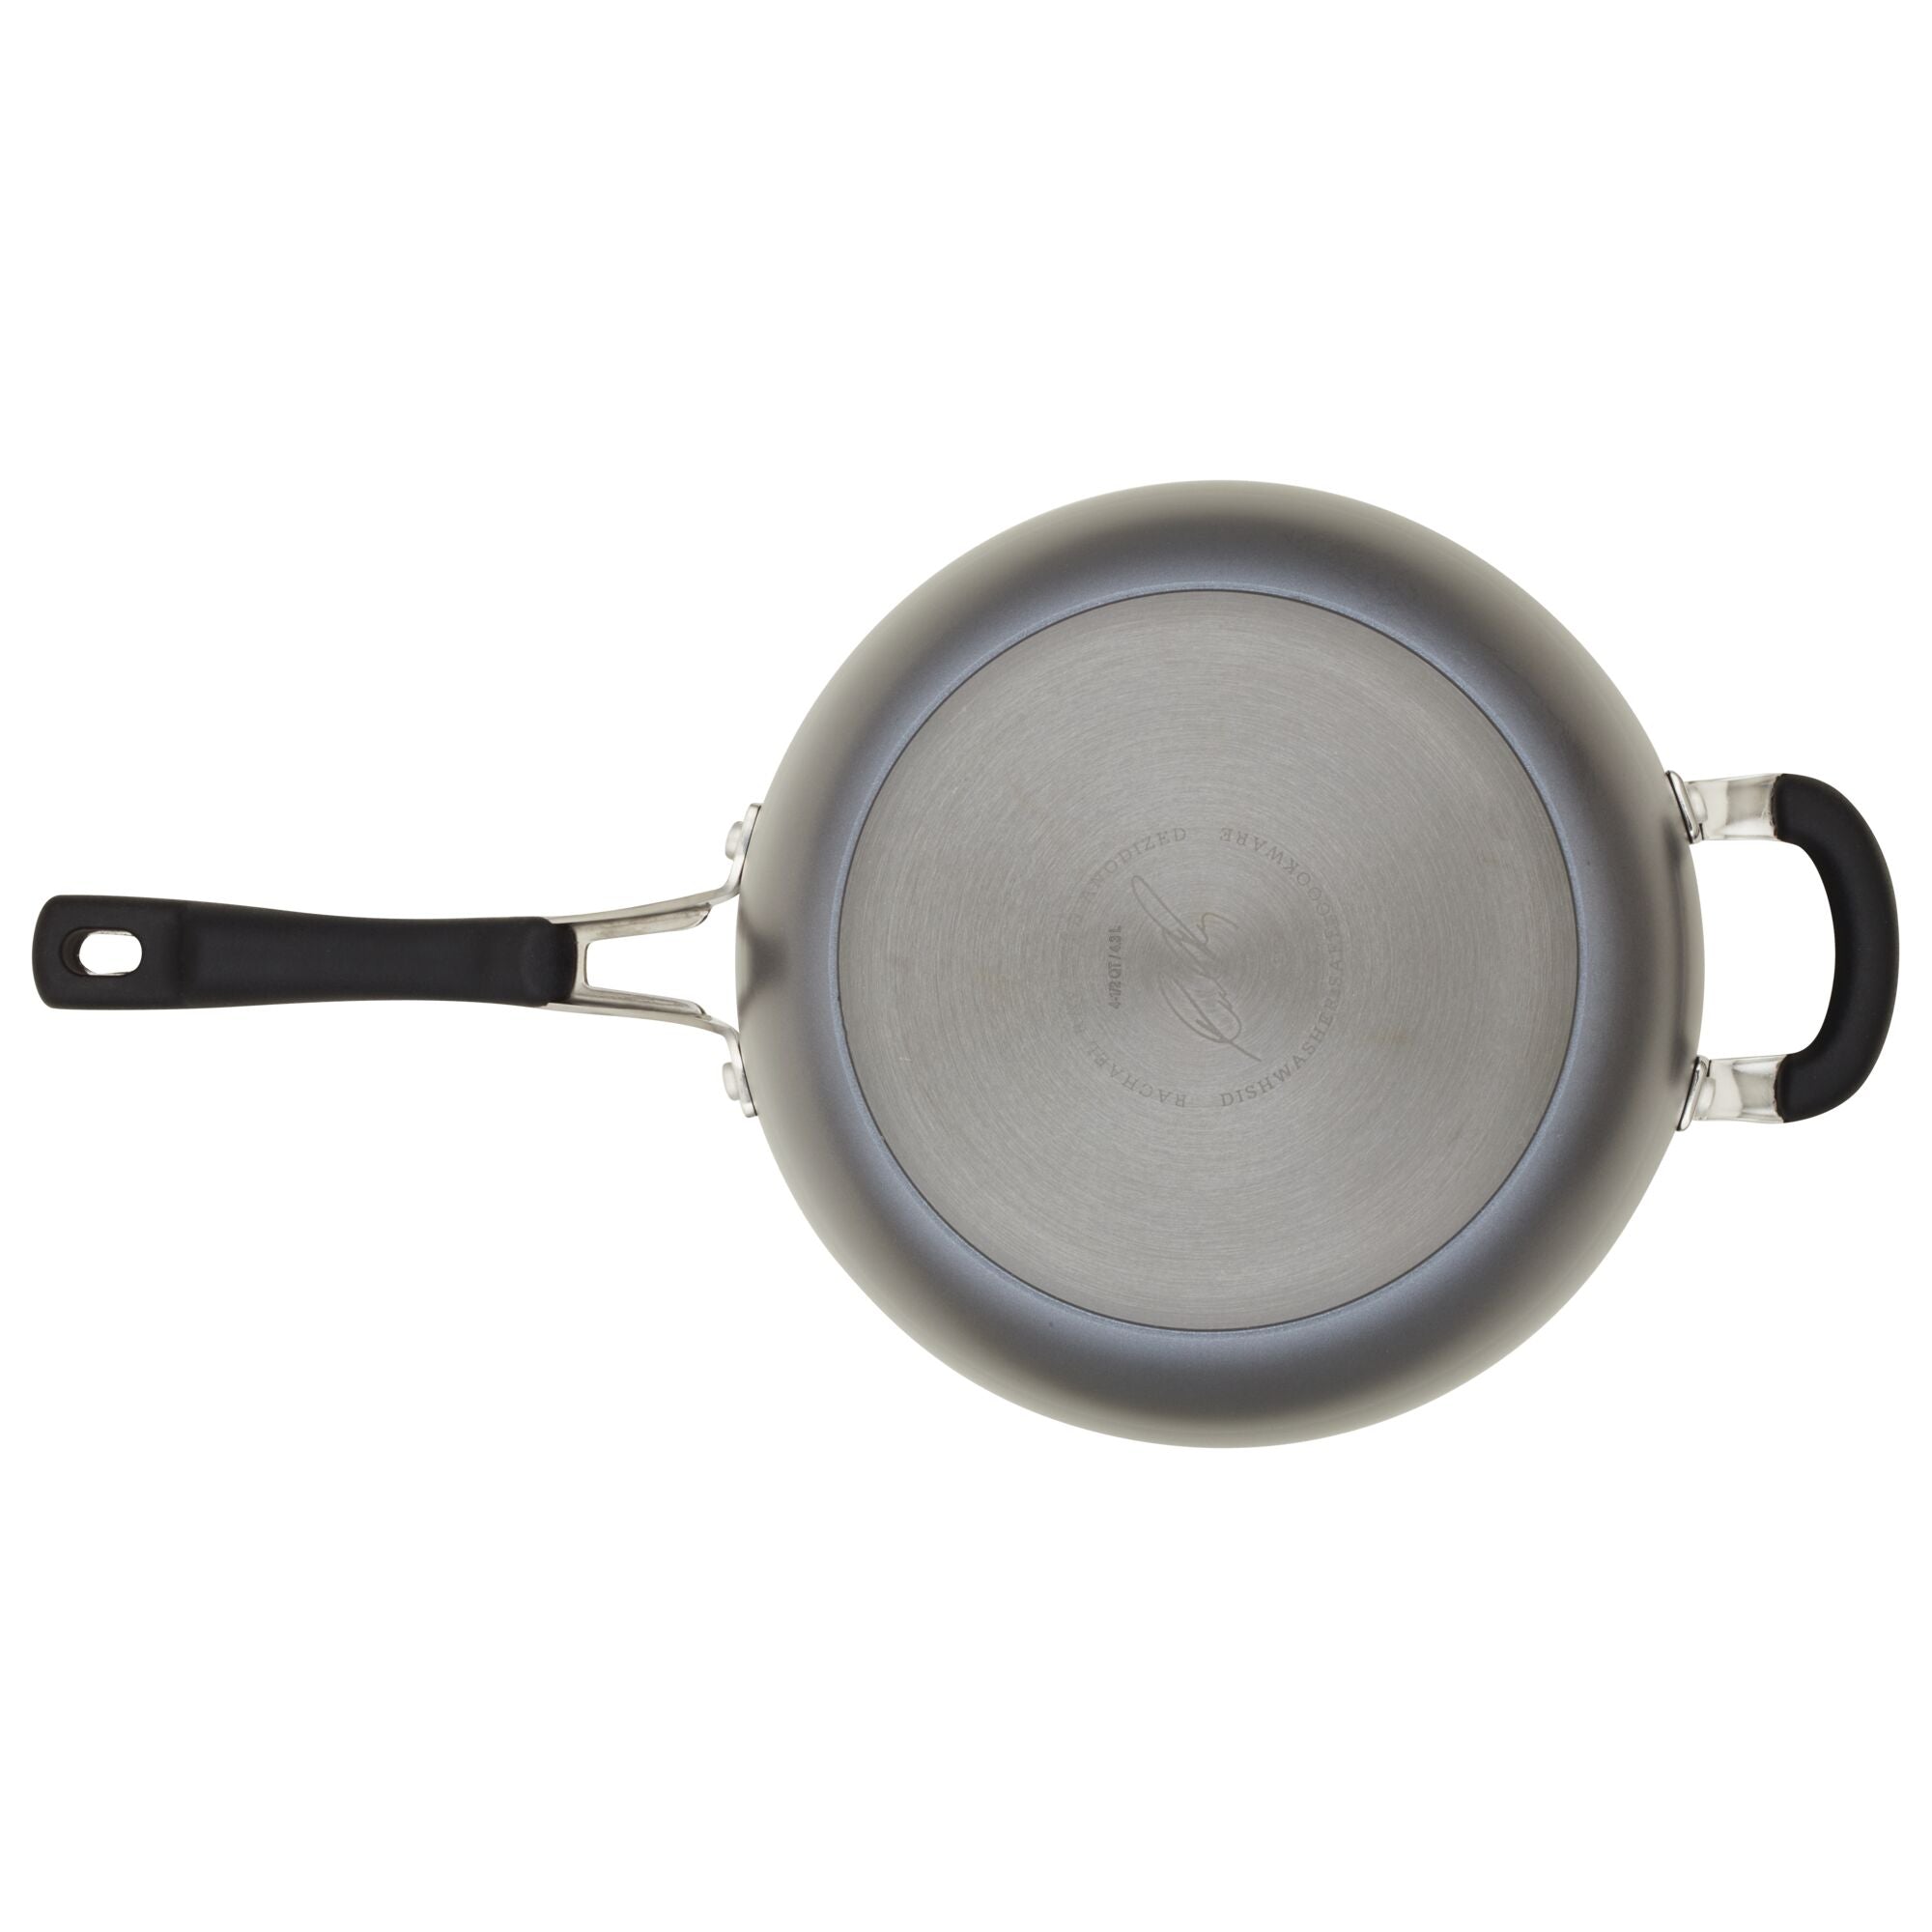 Cooks Standard 5 Quart/11-Inch Hard Anodized Nonstick Deep Saute Pan with Lid